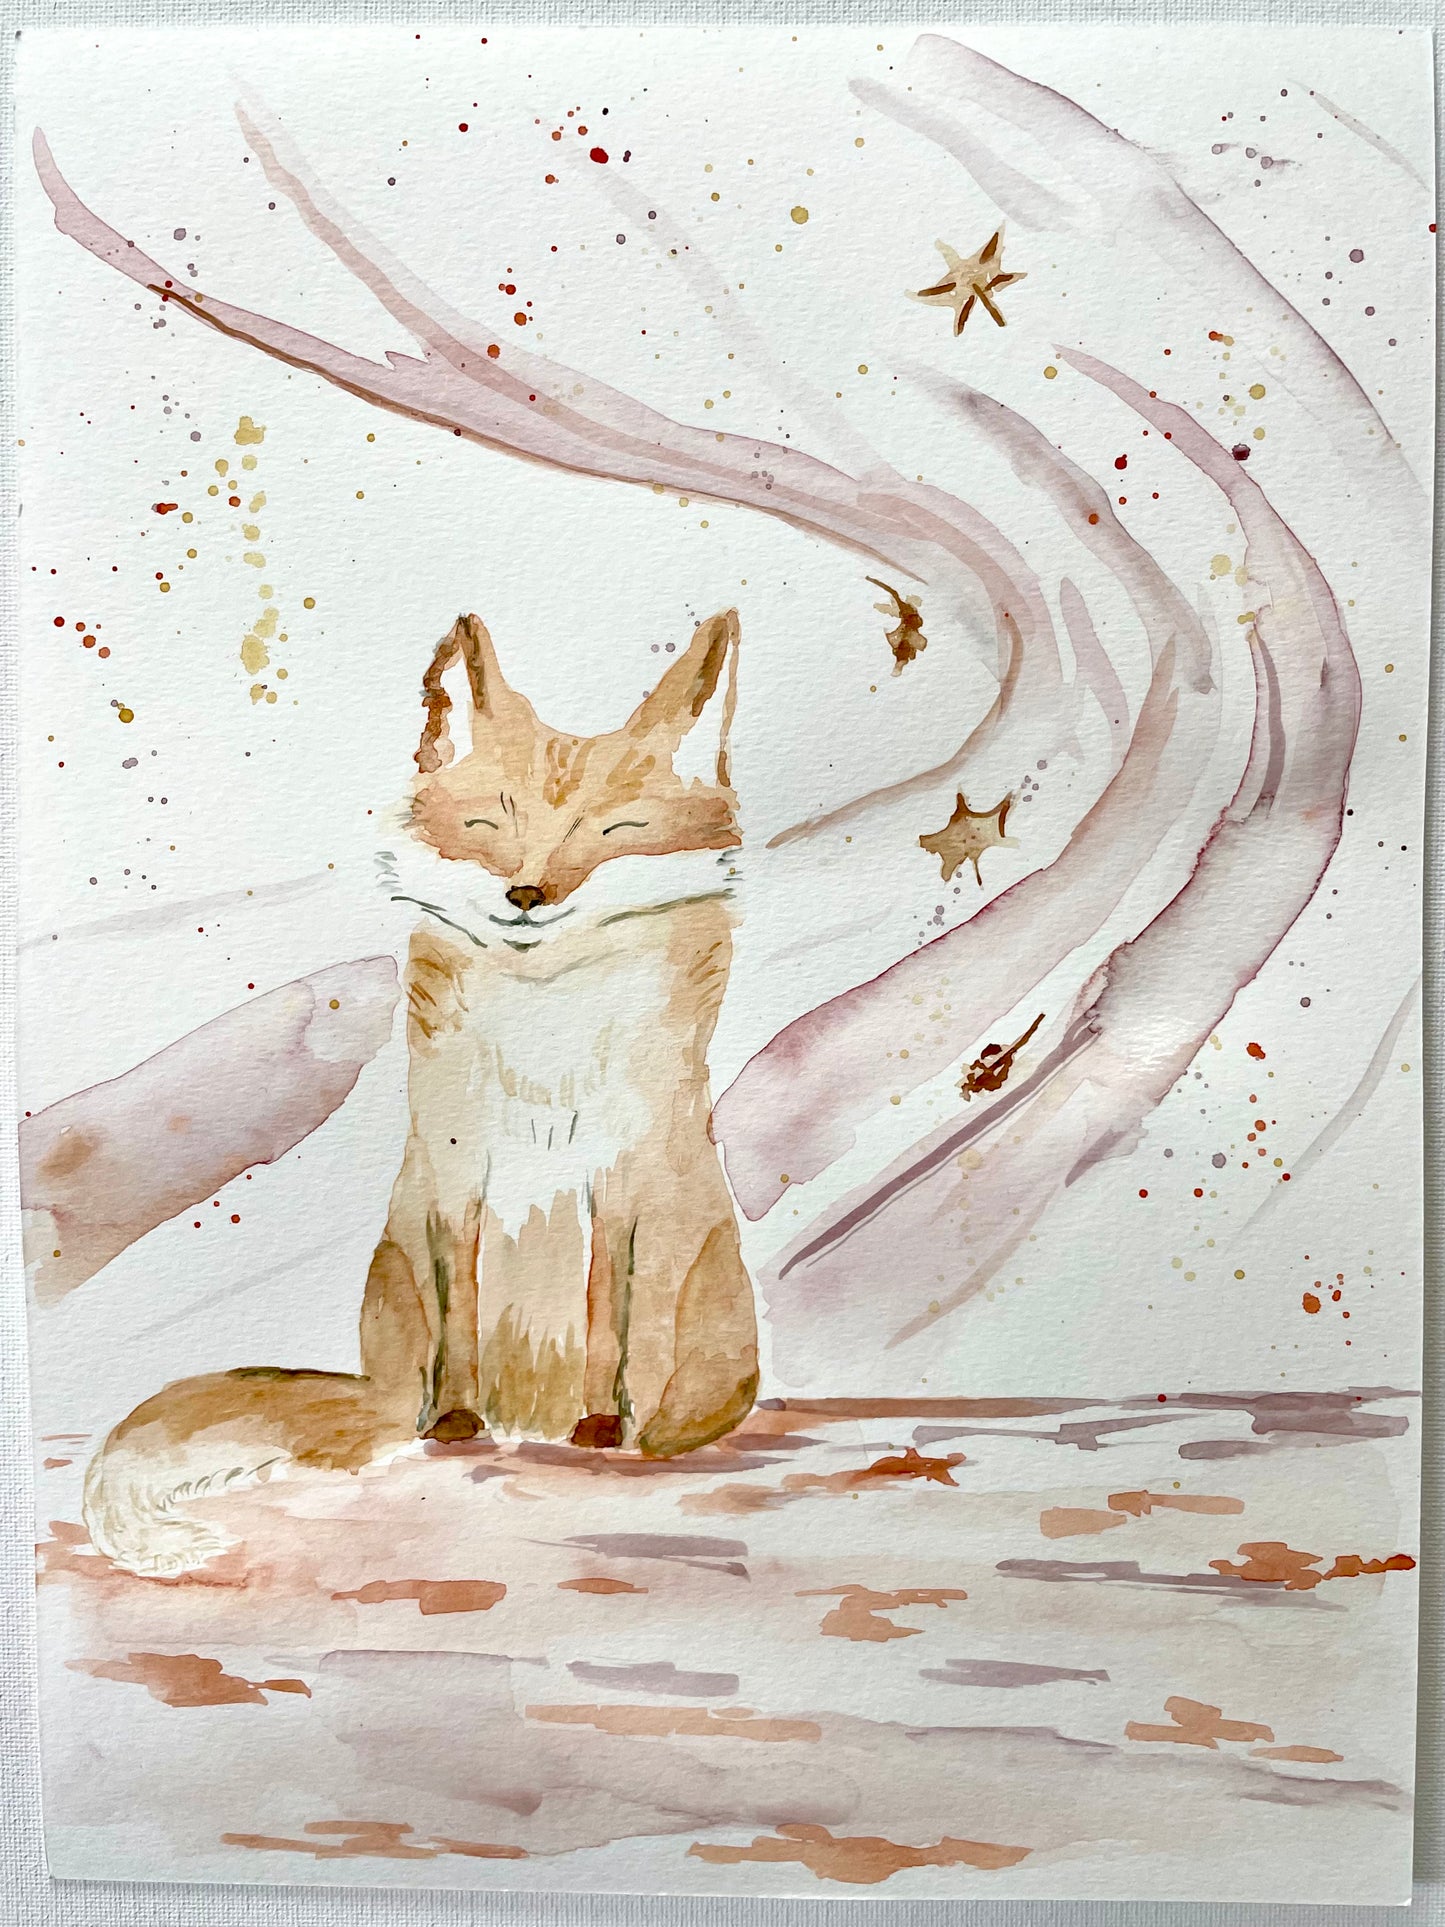 Wed, Oct 4th, 4-6P Kids Paint "Watercolor Fall Fox" Public Painting Class